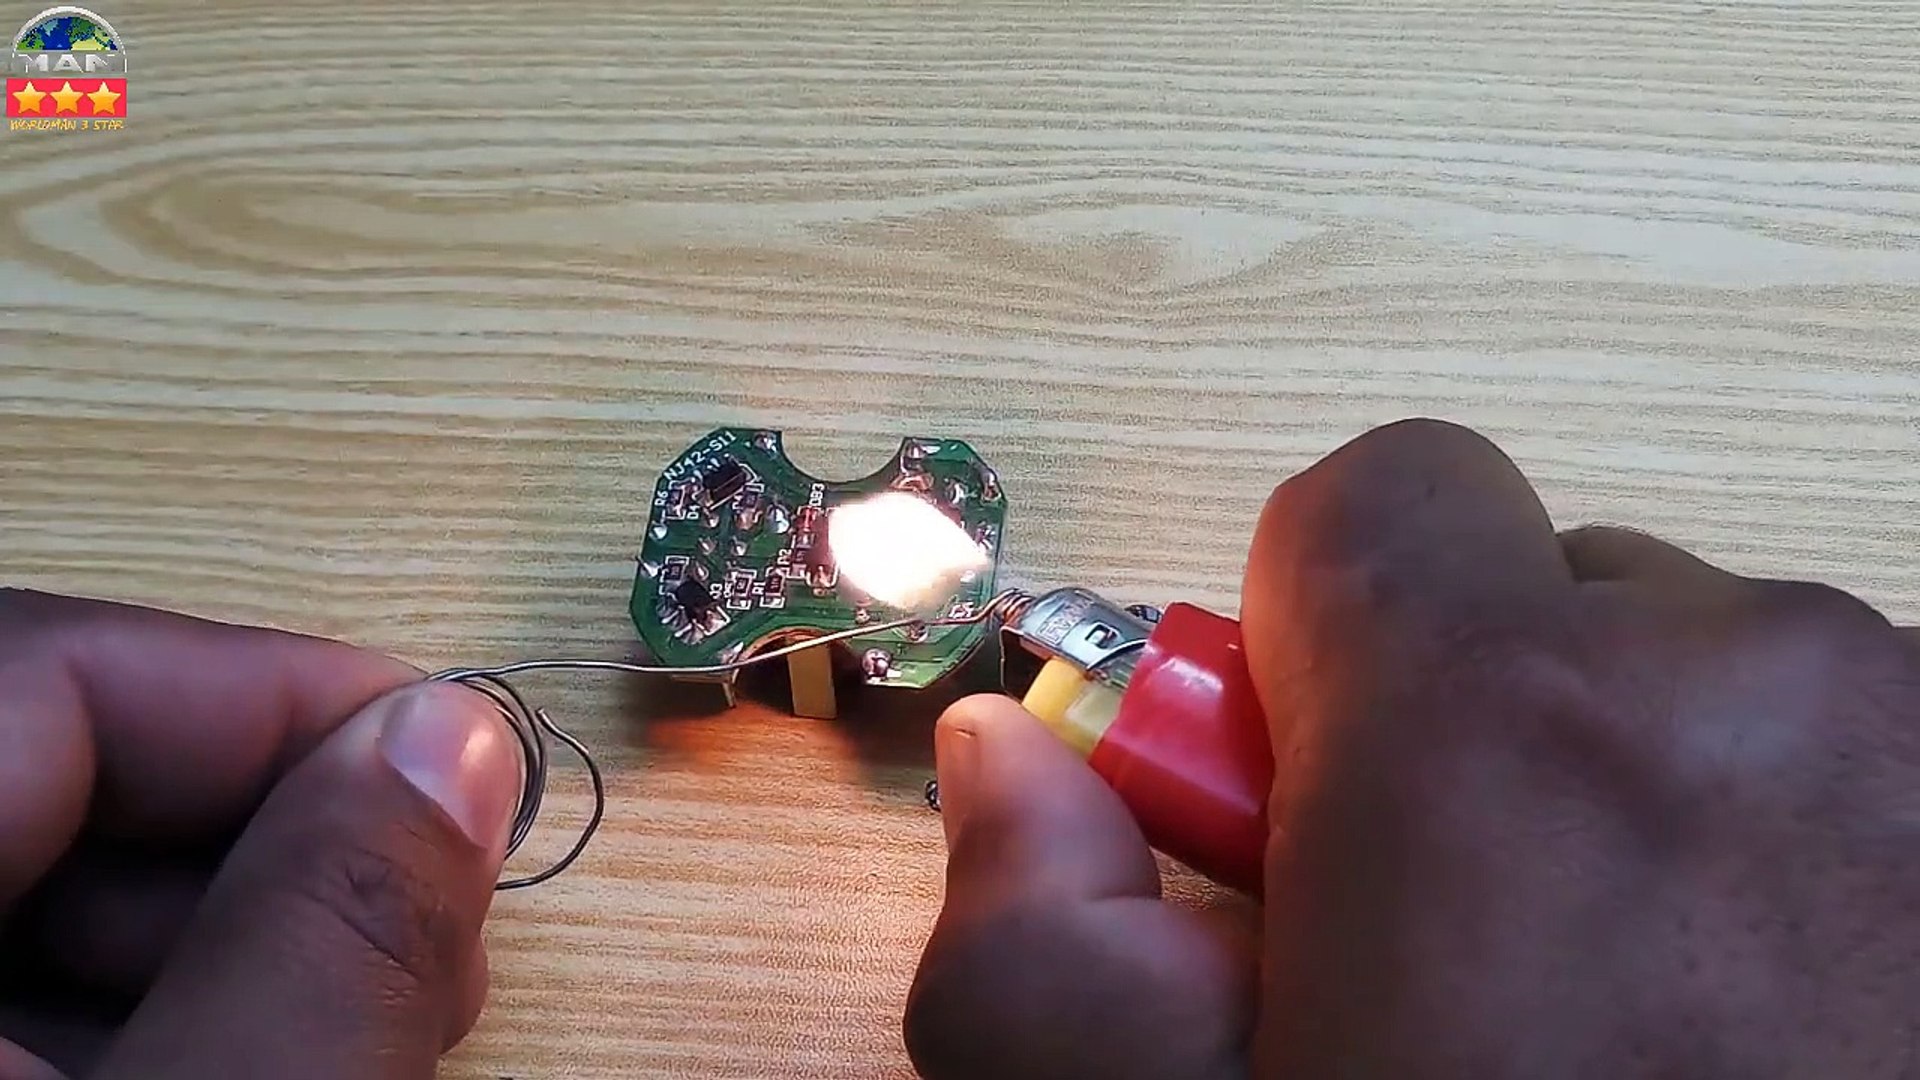 How To Make Soldering Iron By Lighter _ At Homemade - video Dailymotion